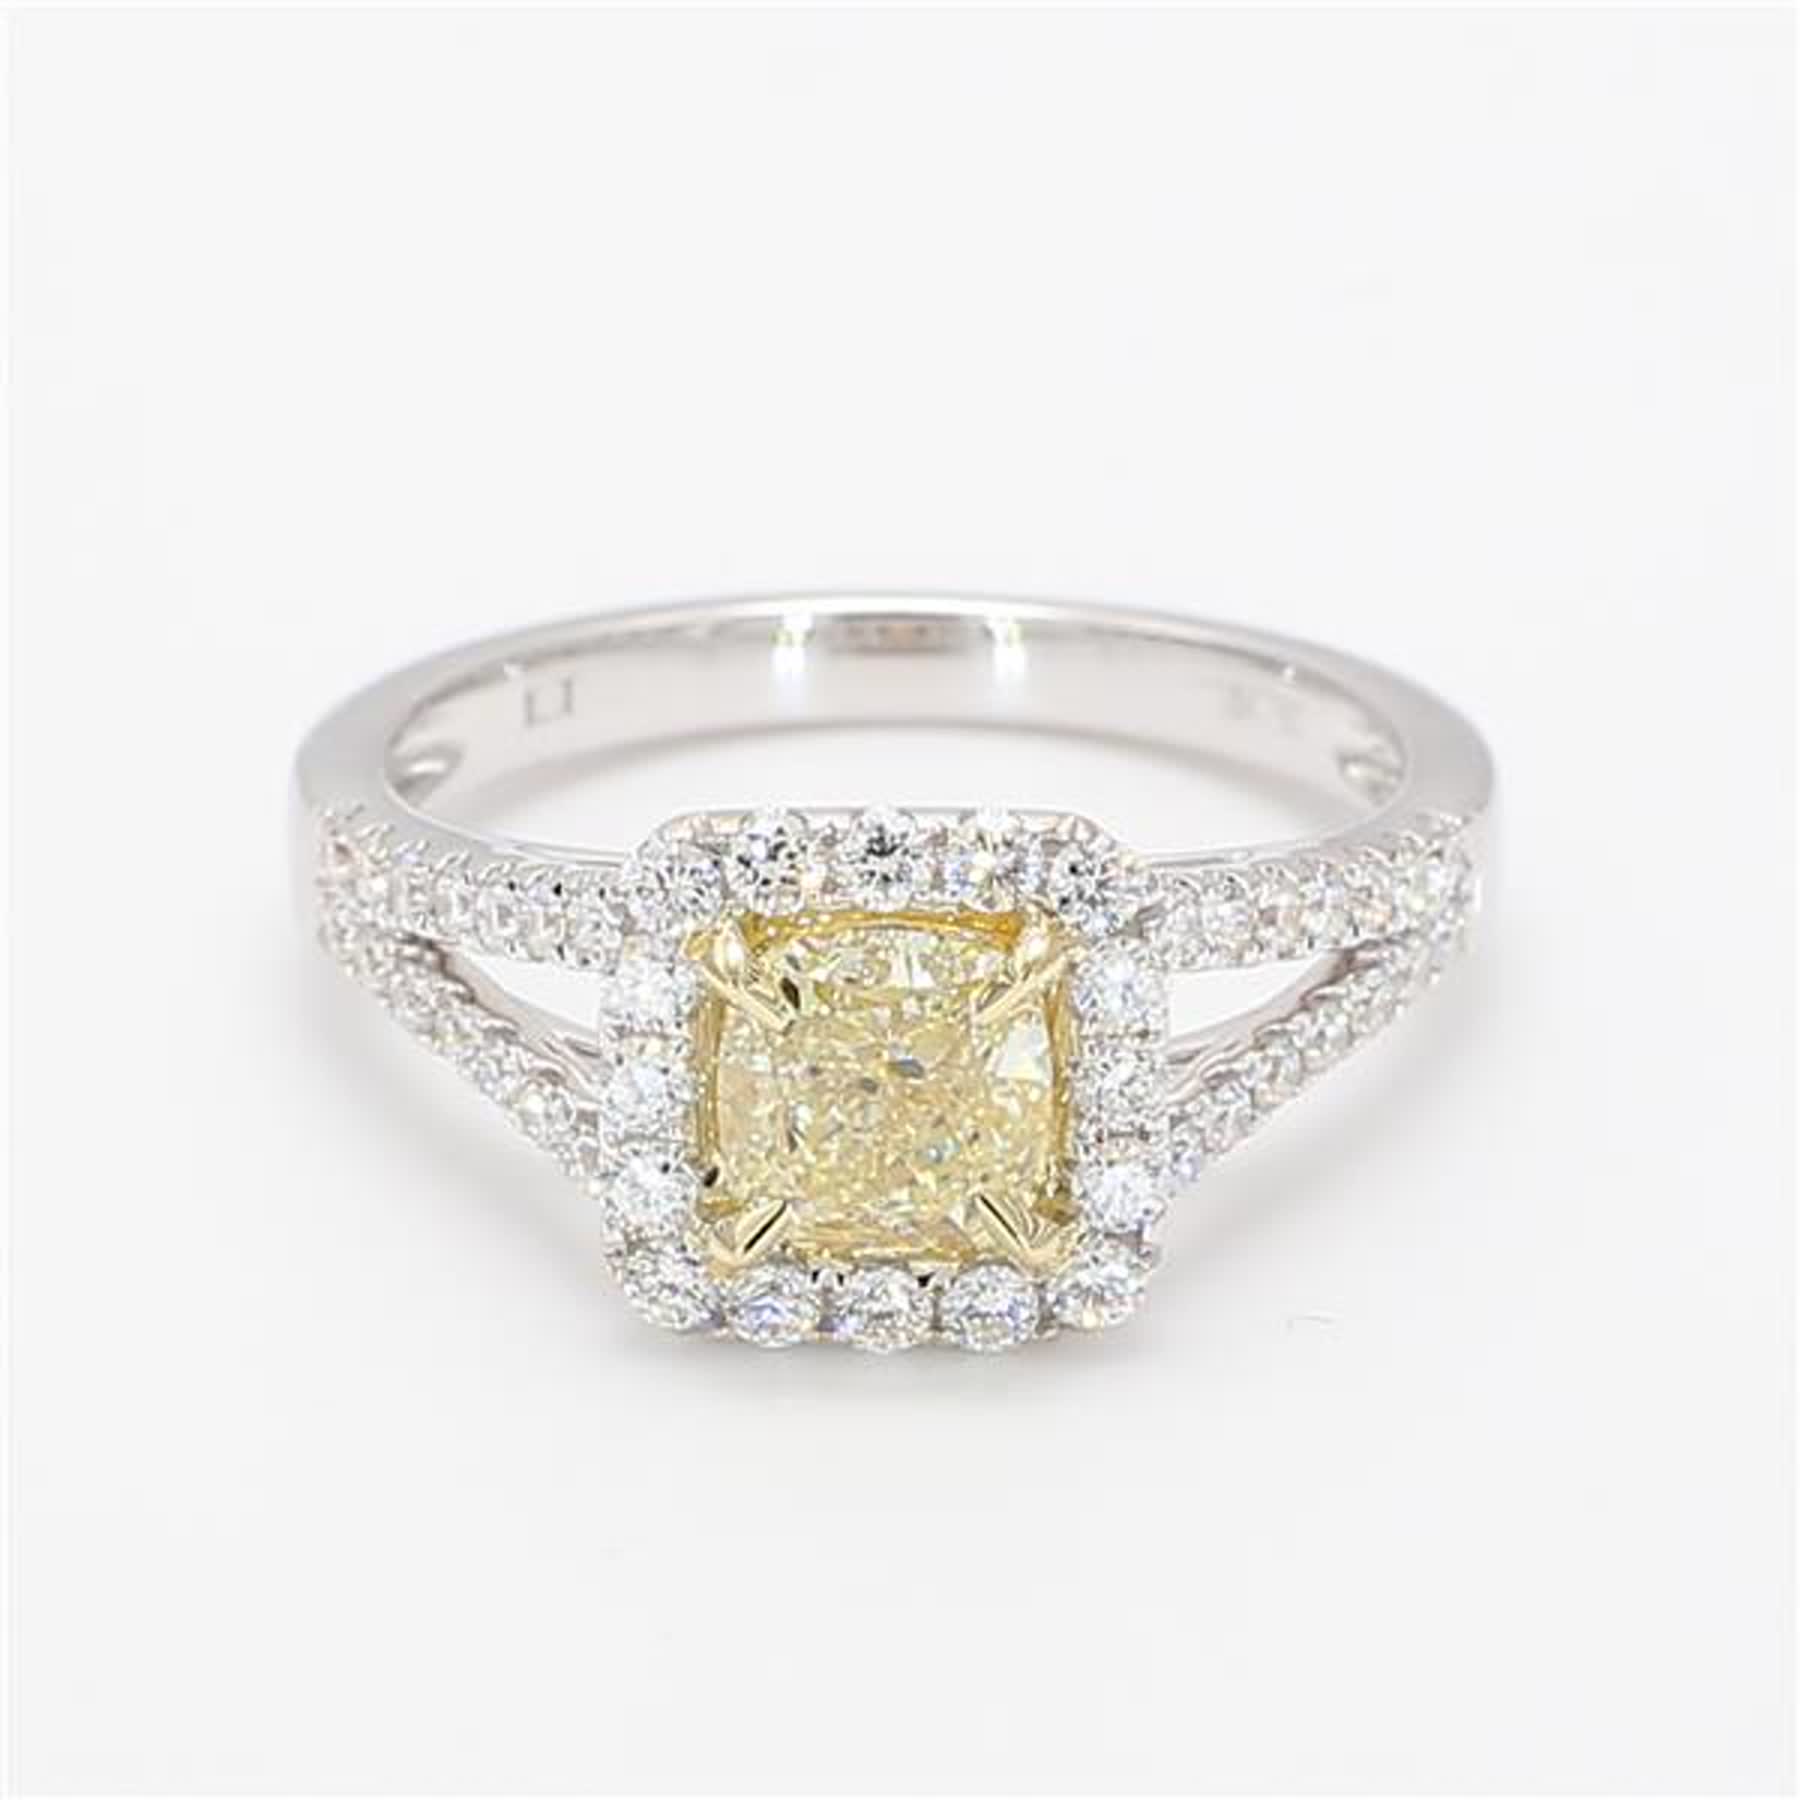 GIA Certified Natural Yellow Cushion and White Diamond 1.52 Carat TW Gold Ring